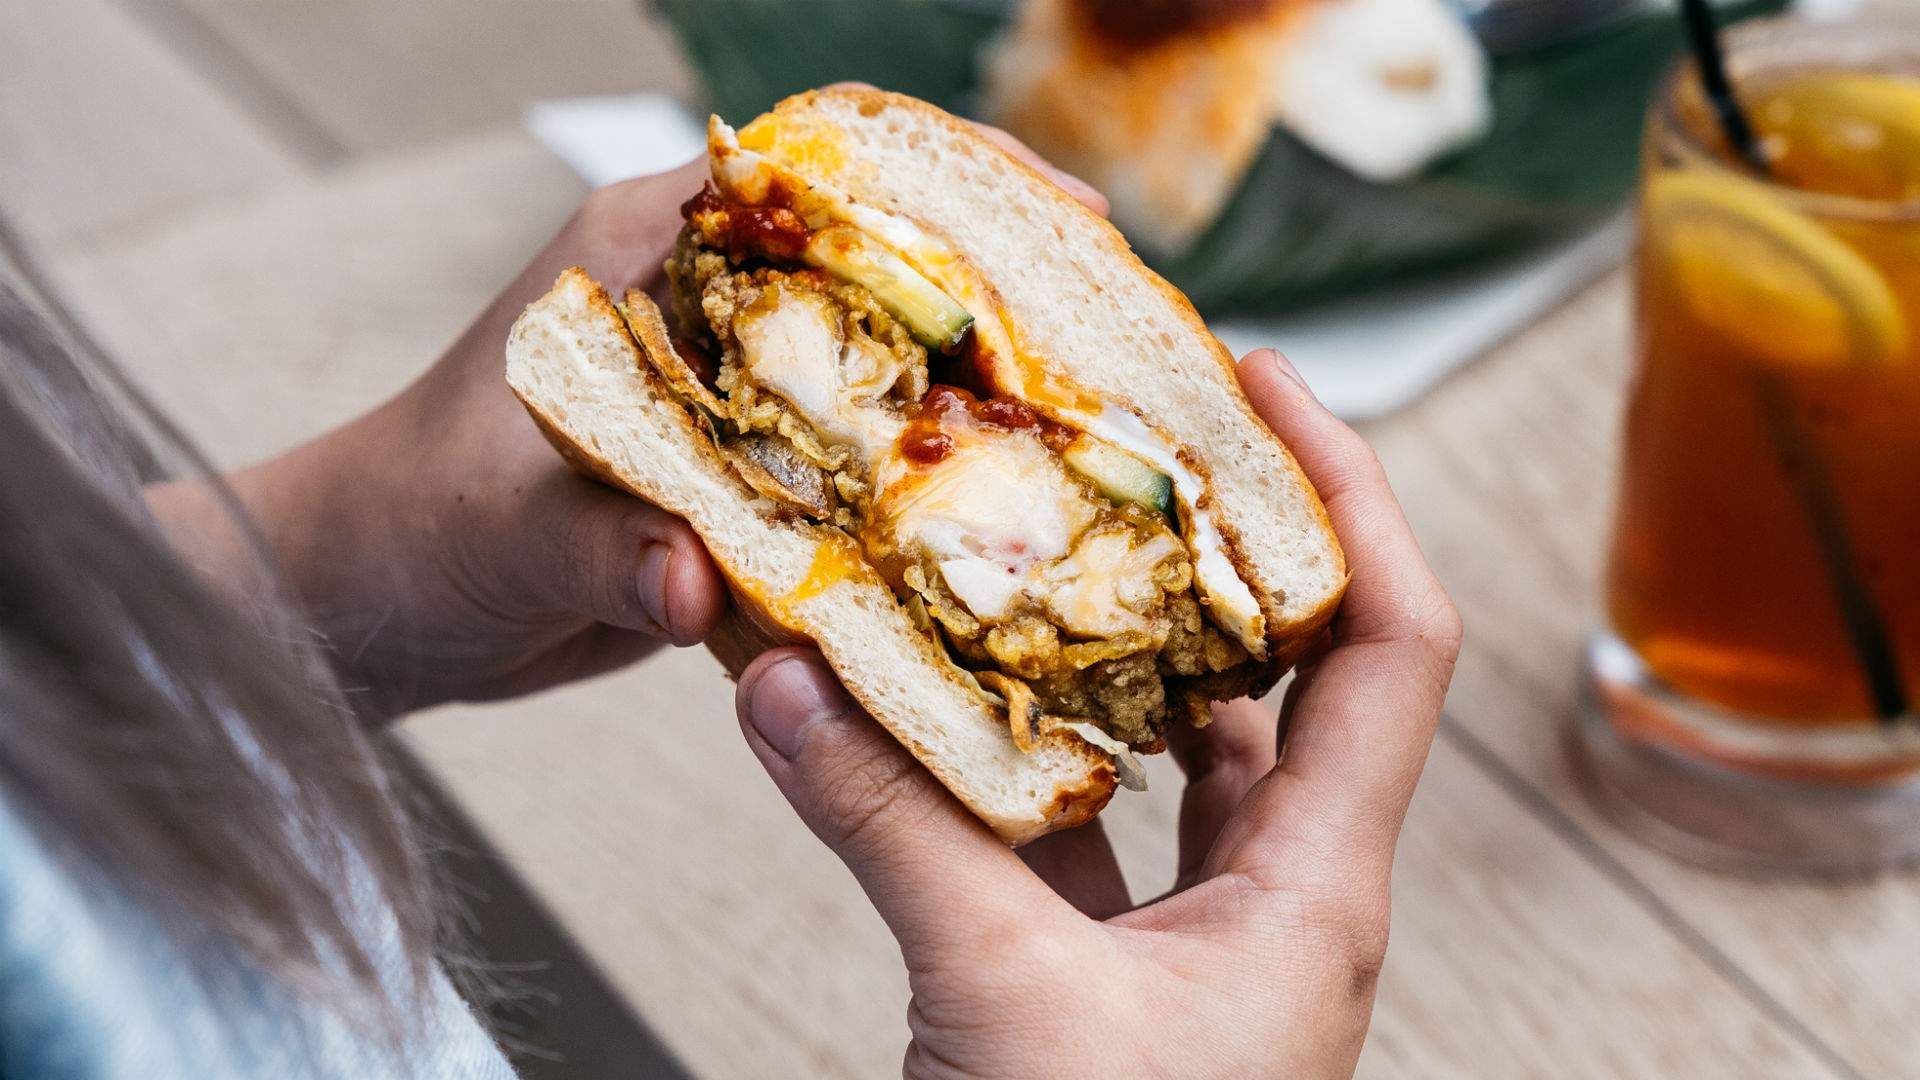 PappaRich Is Launching a Limited-Edition Nasi Lemak Burger This Winter